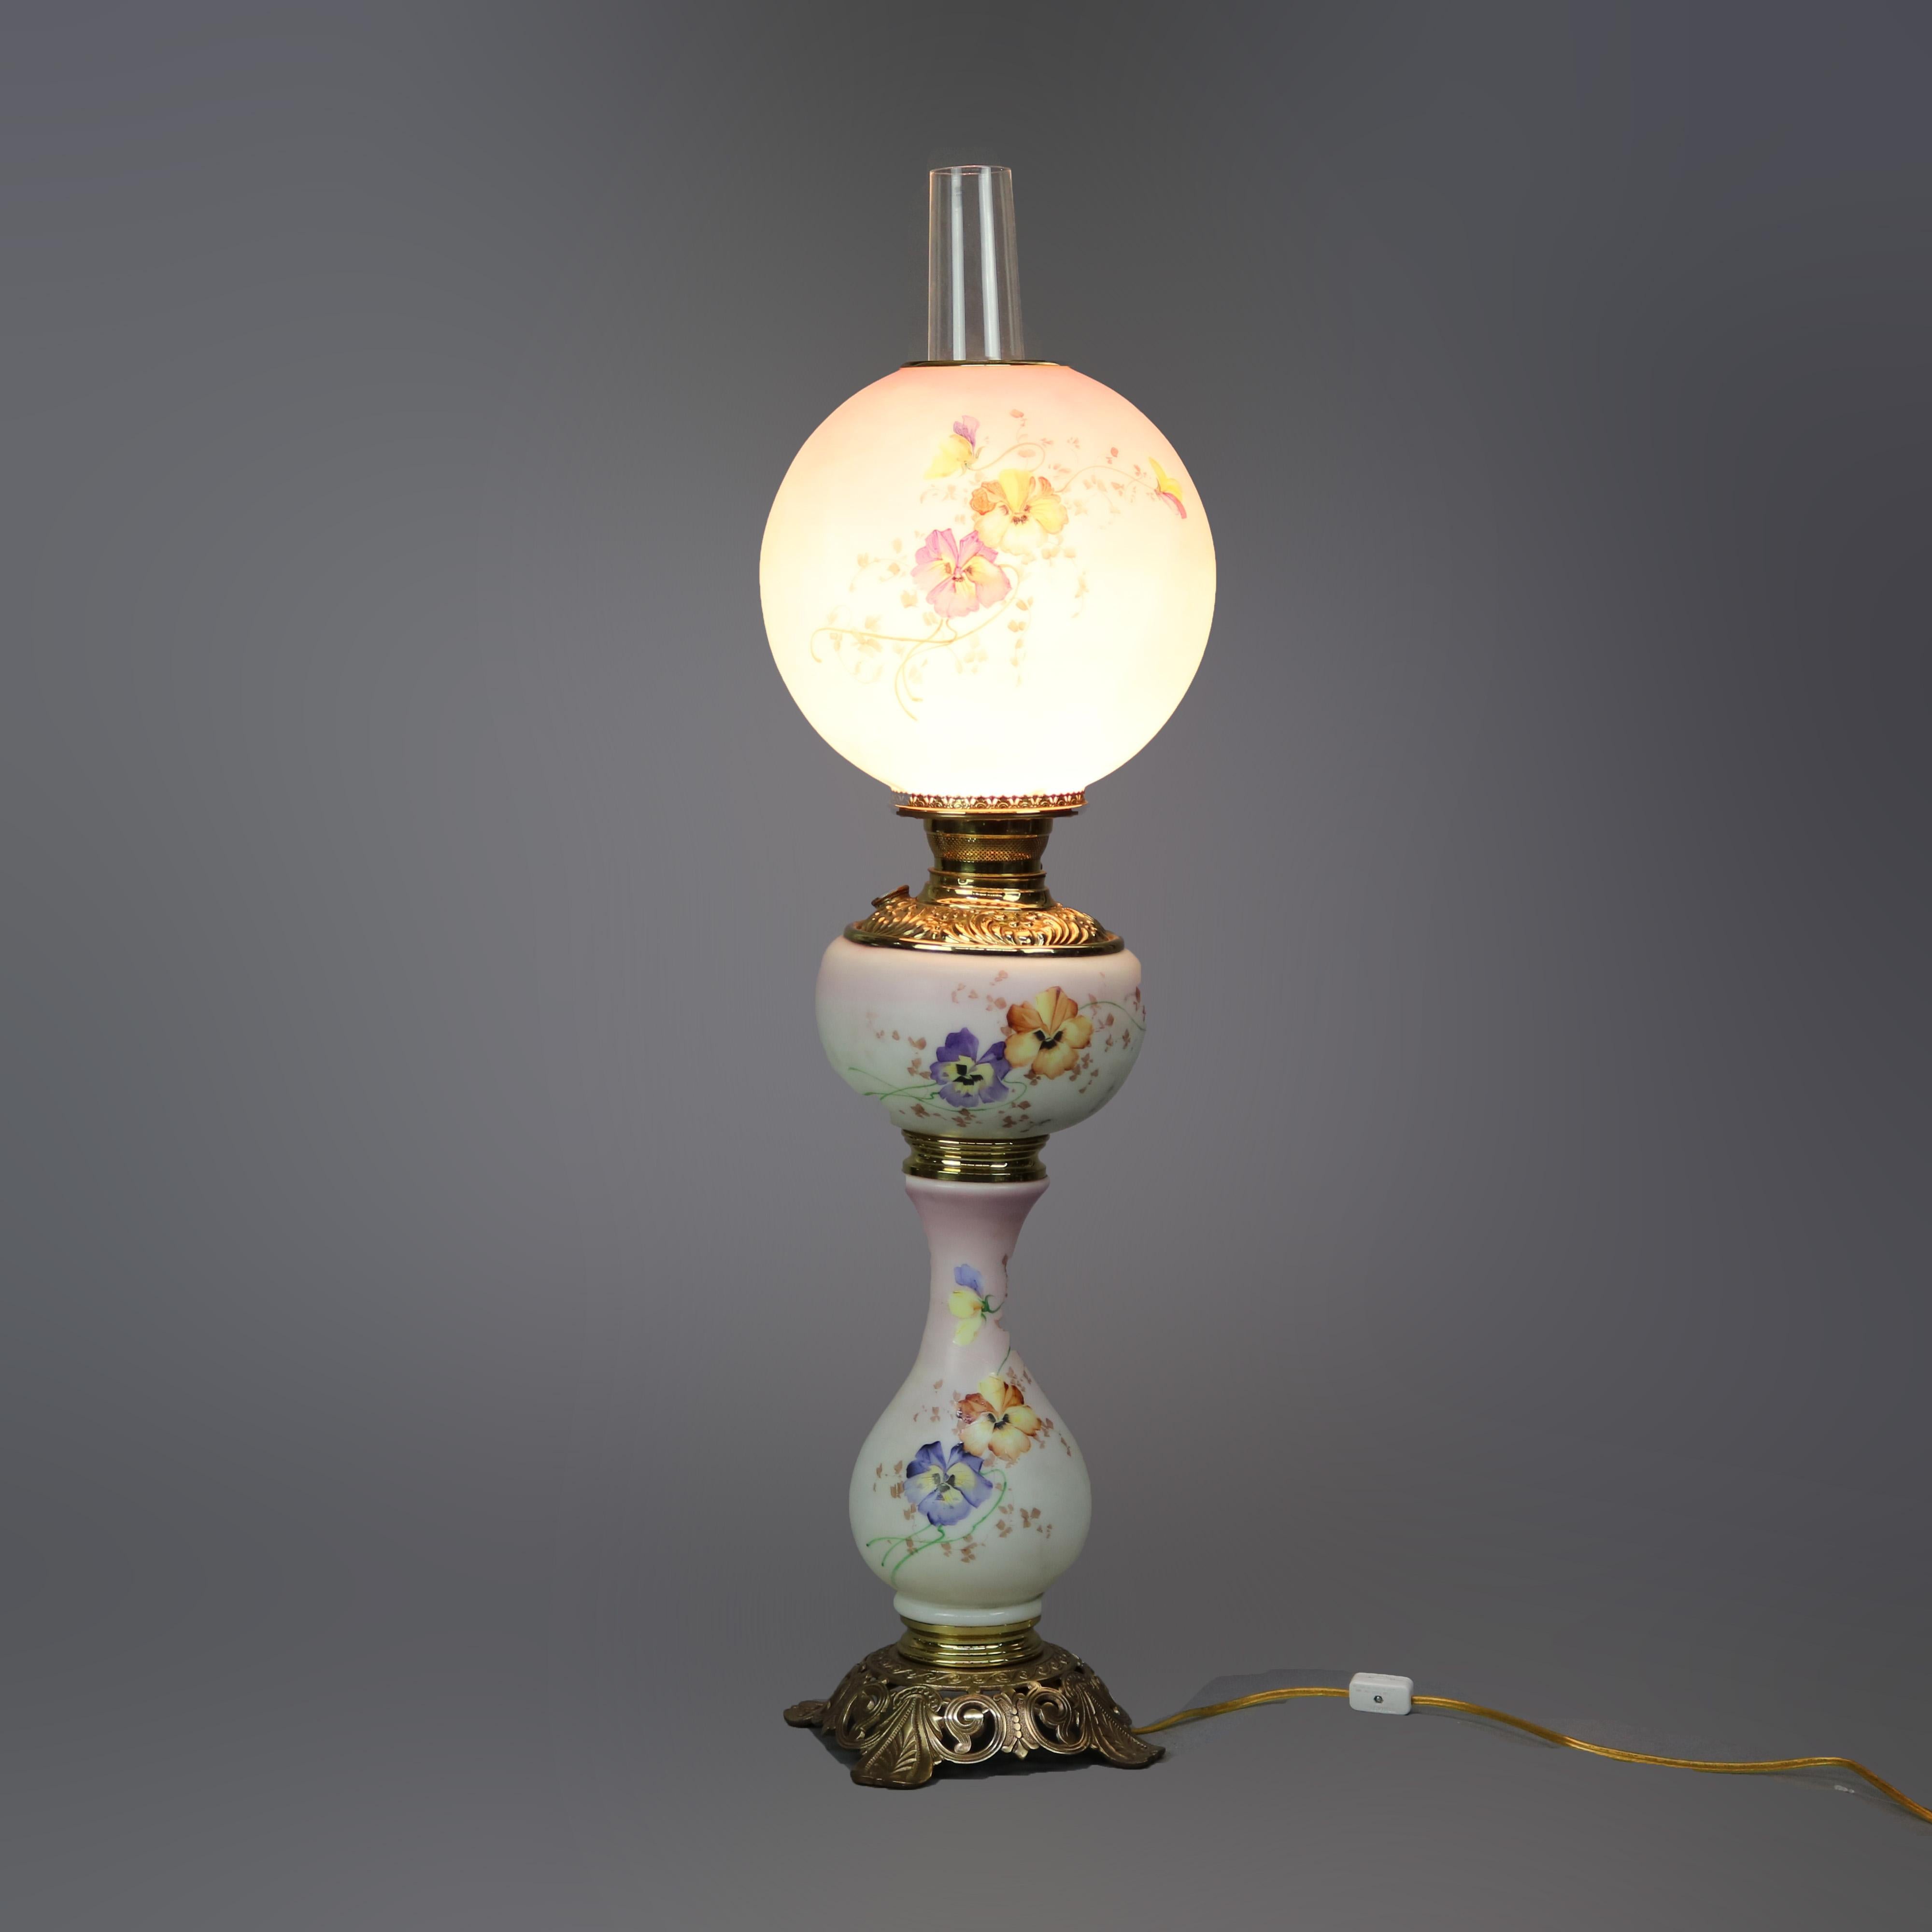 Antique Victorian gone with the wind parlor table lamp offers floral hand painted glass and brass construction in hourglass form seated on cast foliate base, electrified, c1890

Measures - 33.5'' height x 8.5'' diameter.